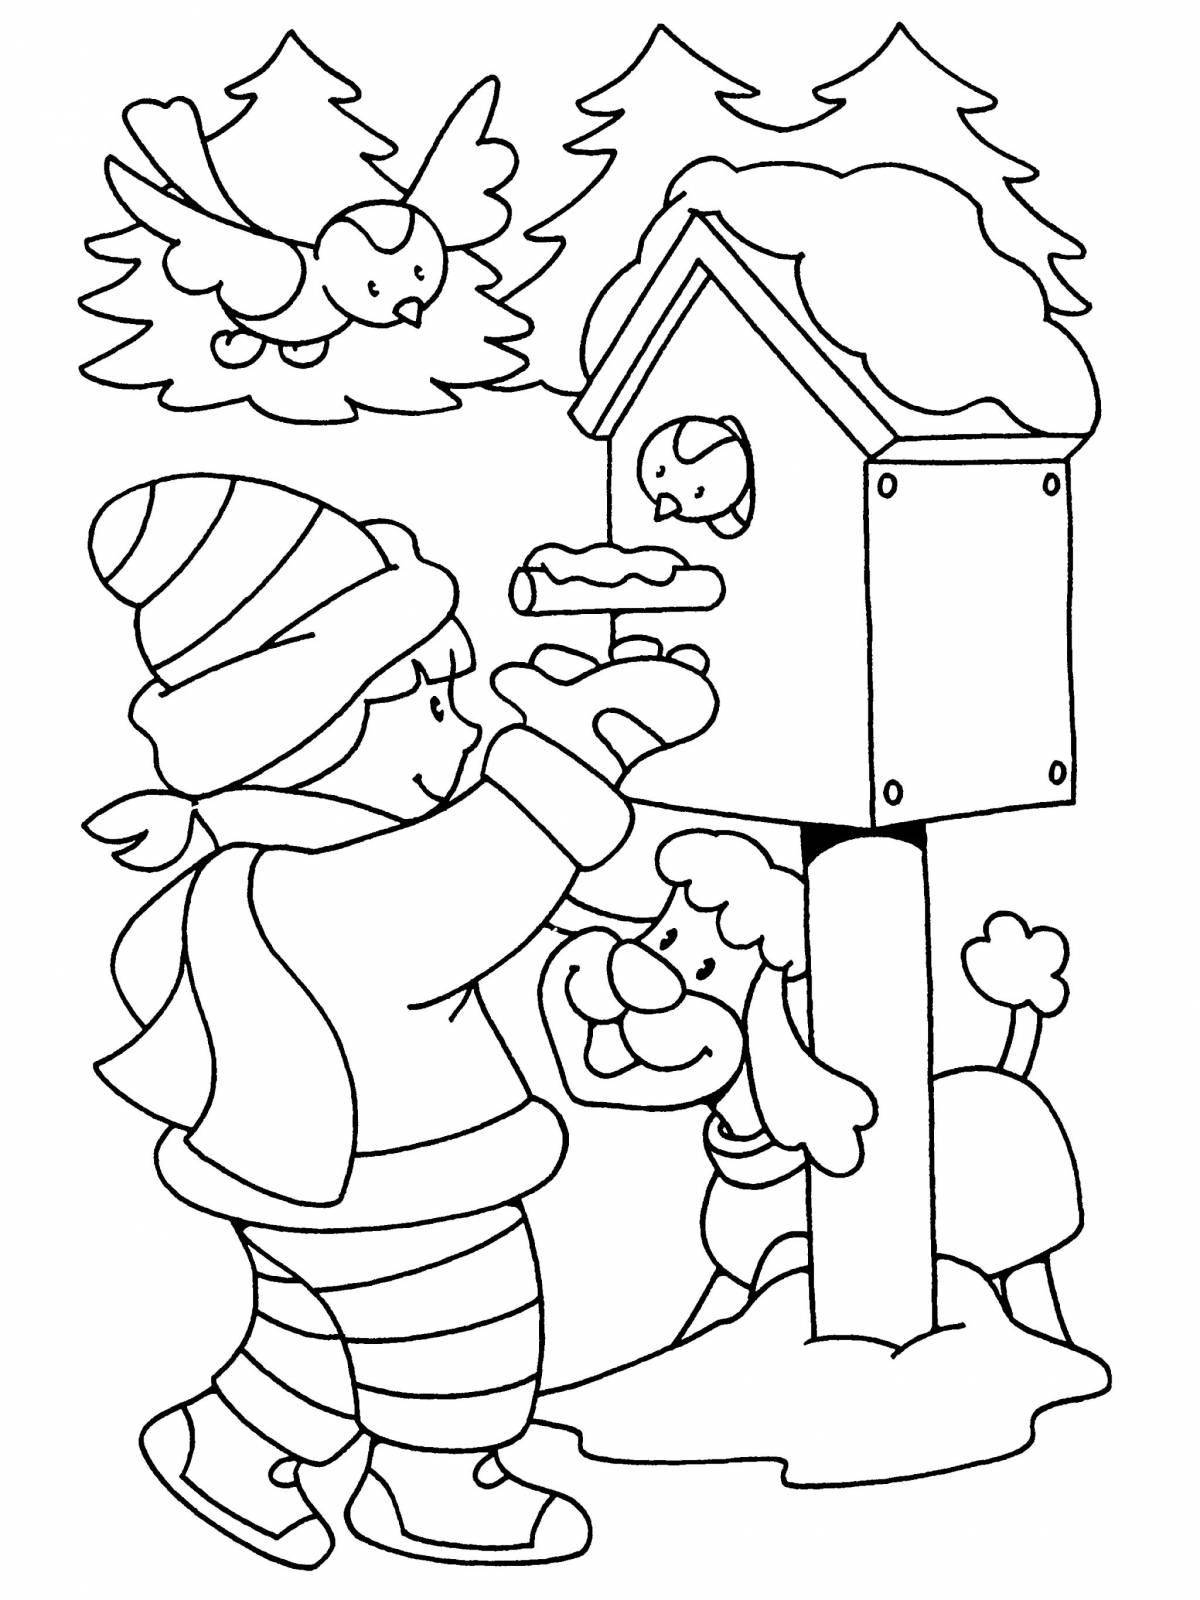 Radiant winter senior group coloring page